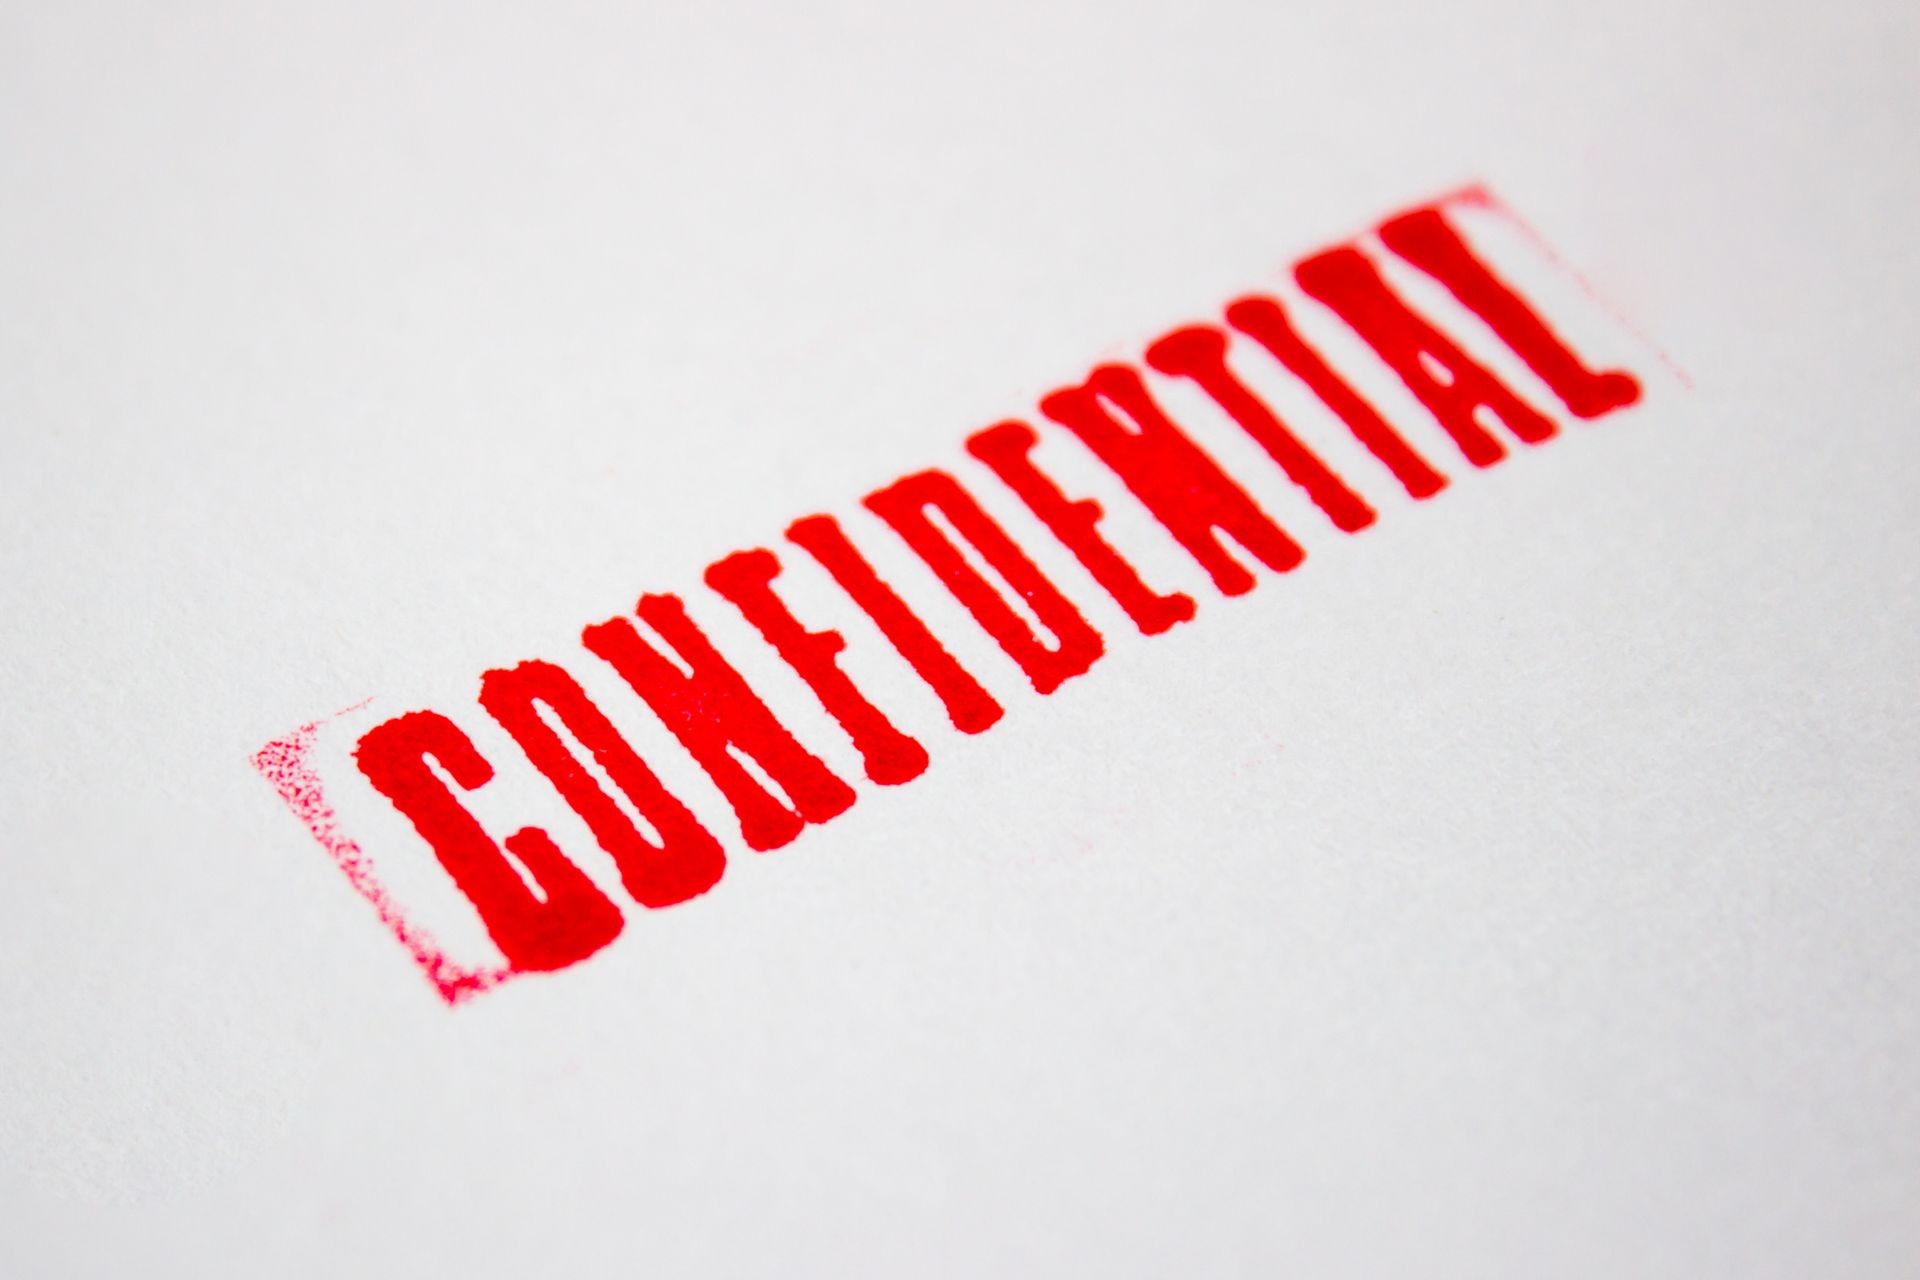 Red CONFIDENTIAL word grunge rubber stamp on white paper or document. Show top secret, Personal private and strictly confidential information, Document and business concept. Copy space for text.